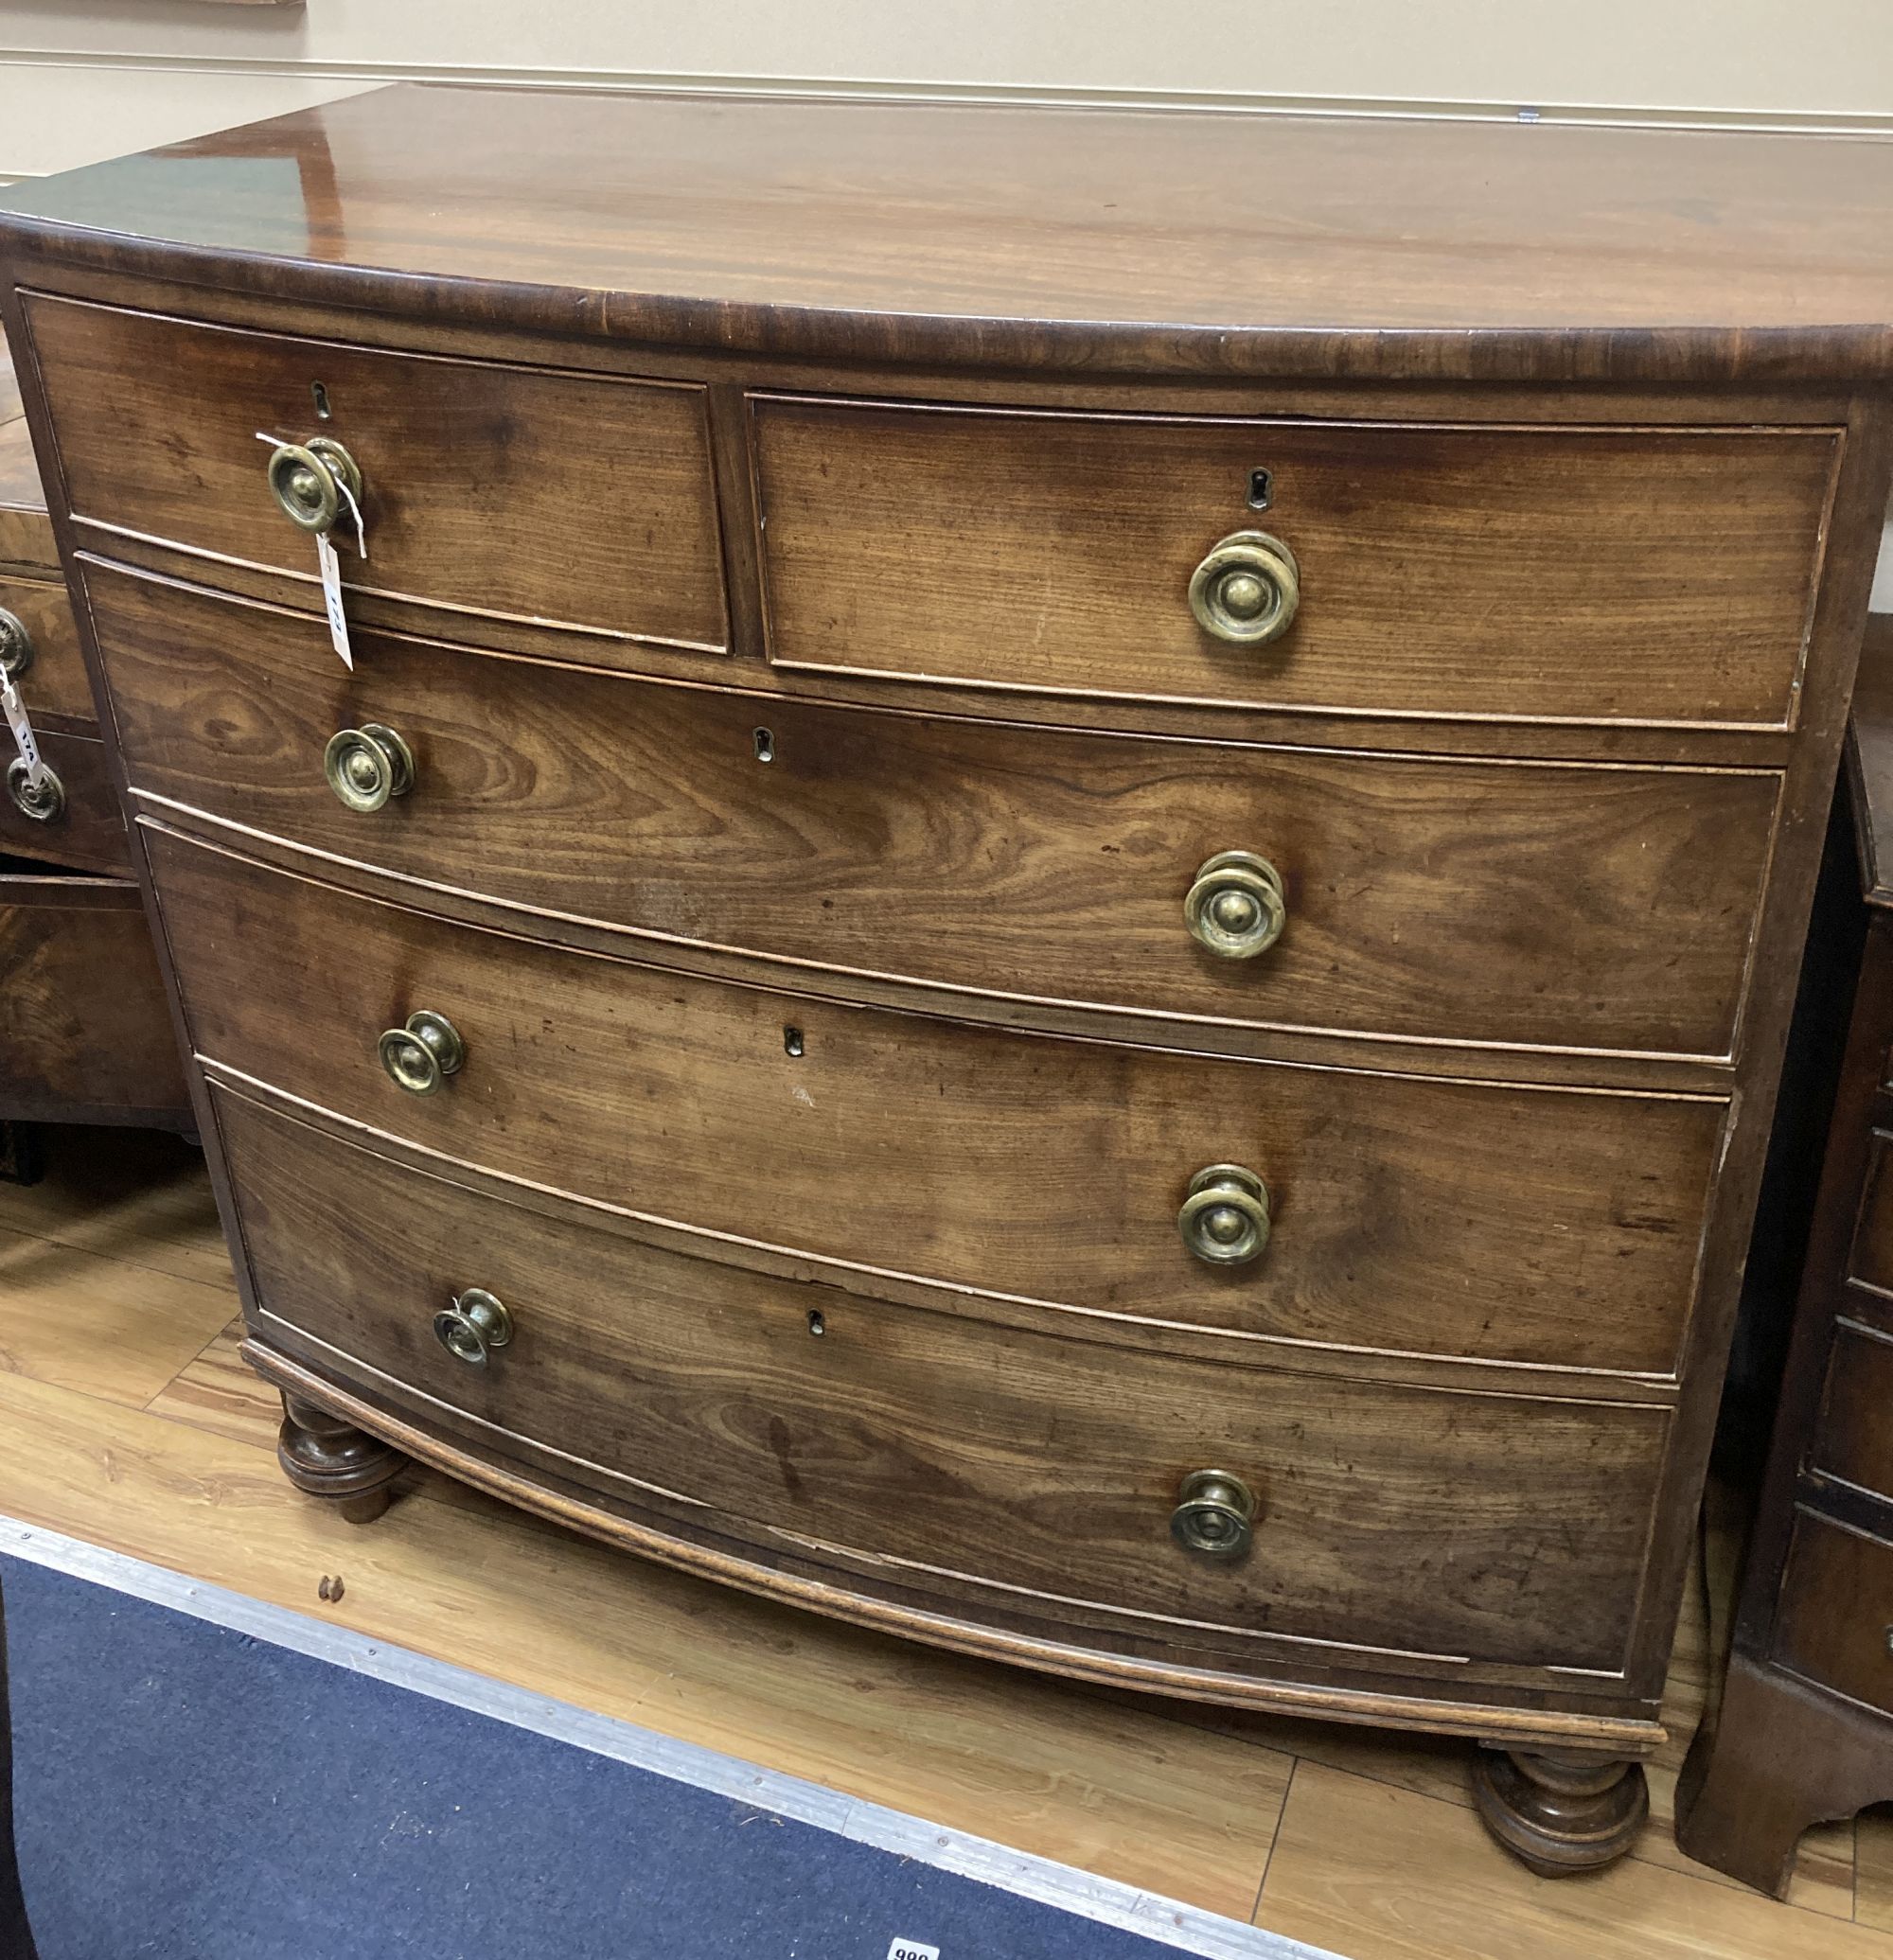 A 19th century mahogany bow-fronted chest of drawers, width 107cm, depth 55cm, height 104cm